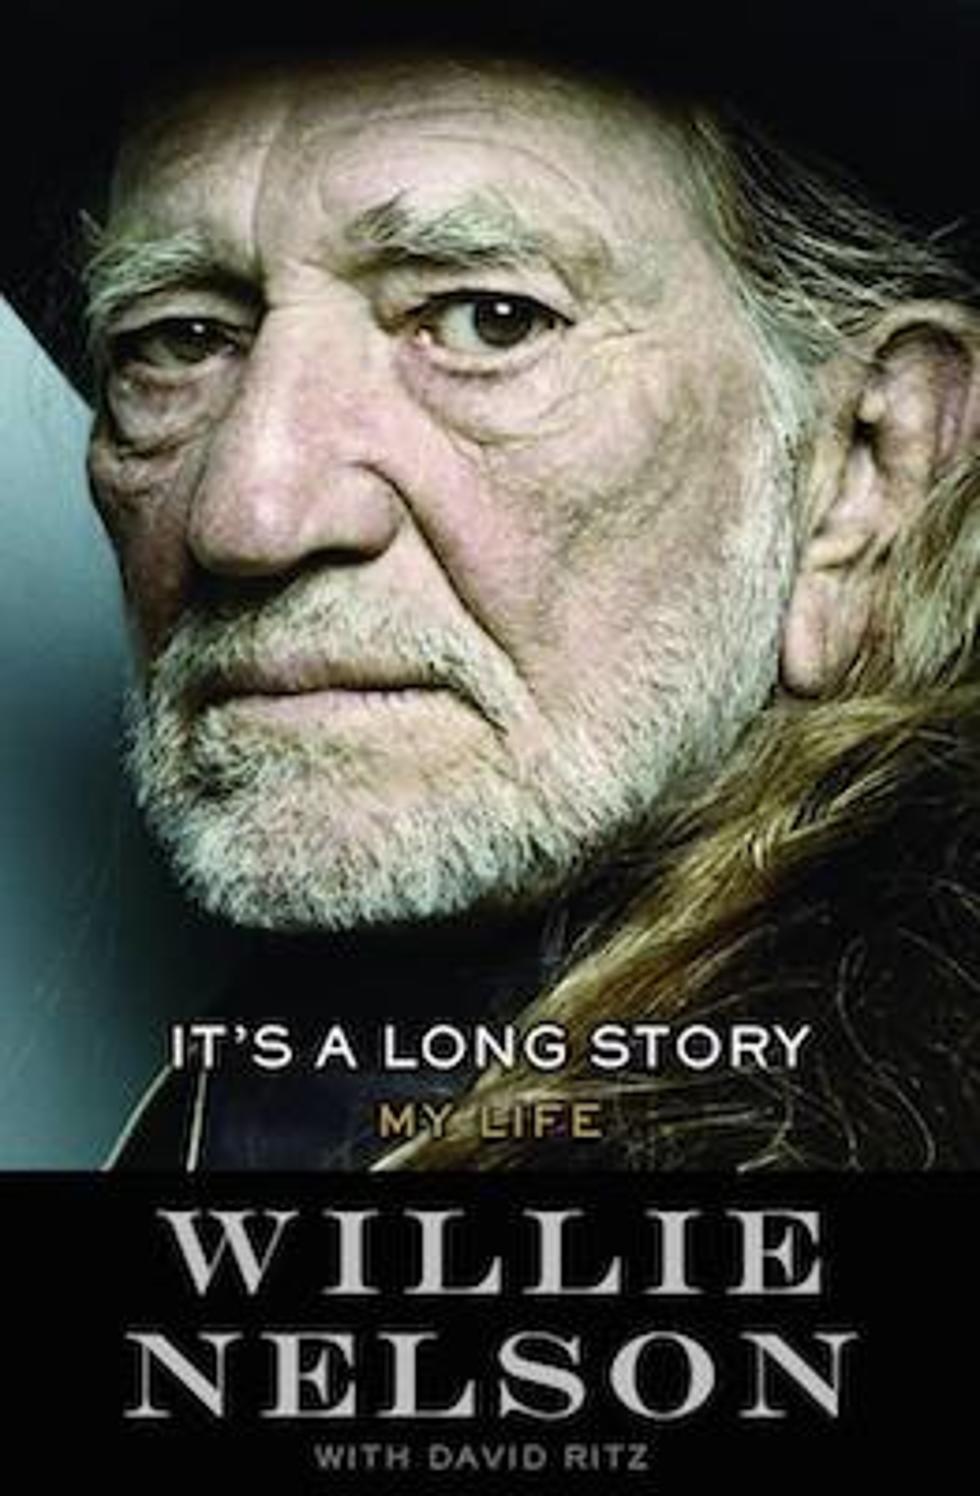 New Willie Nelson Book Releases in May